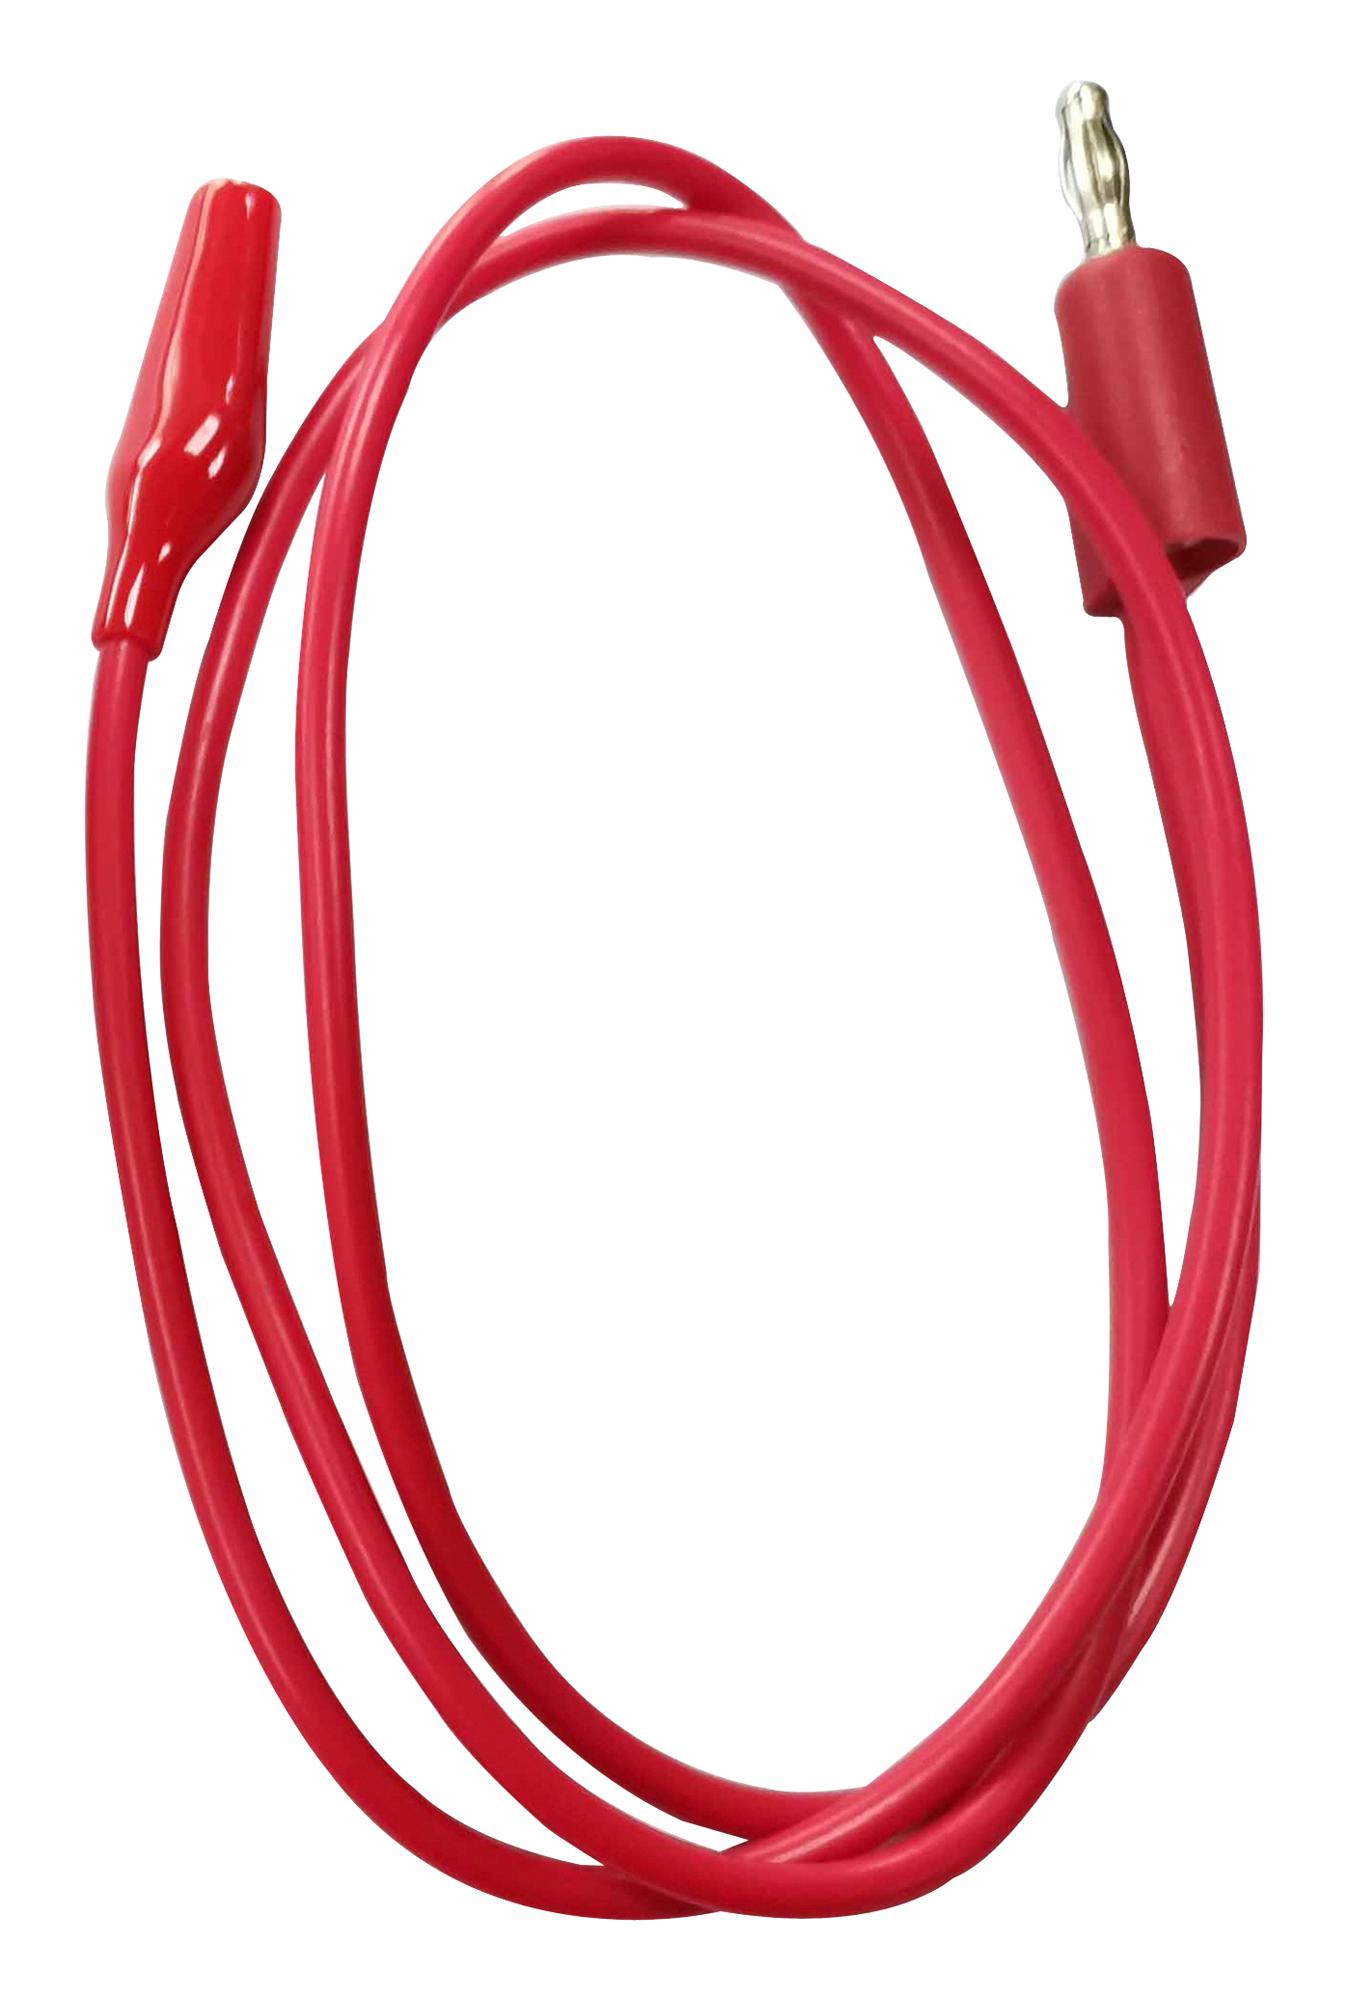 MP770277 TEST LEAD, 5A, 60V, 914MM, RED MULTICOMP PRO